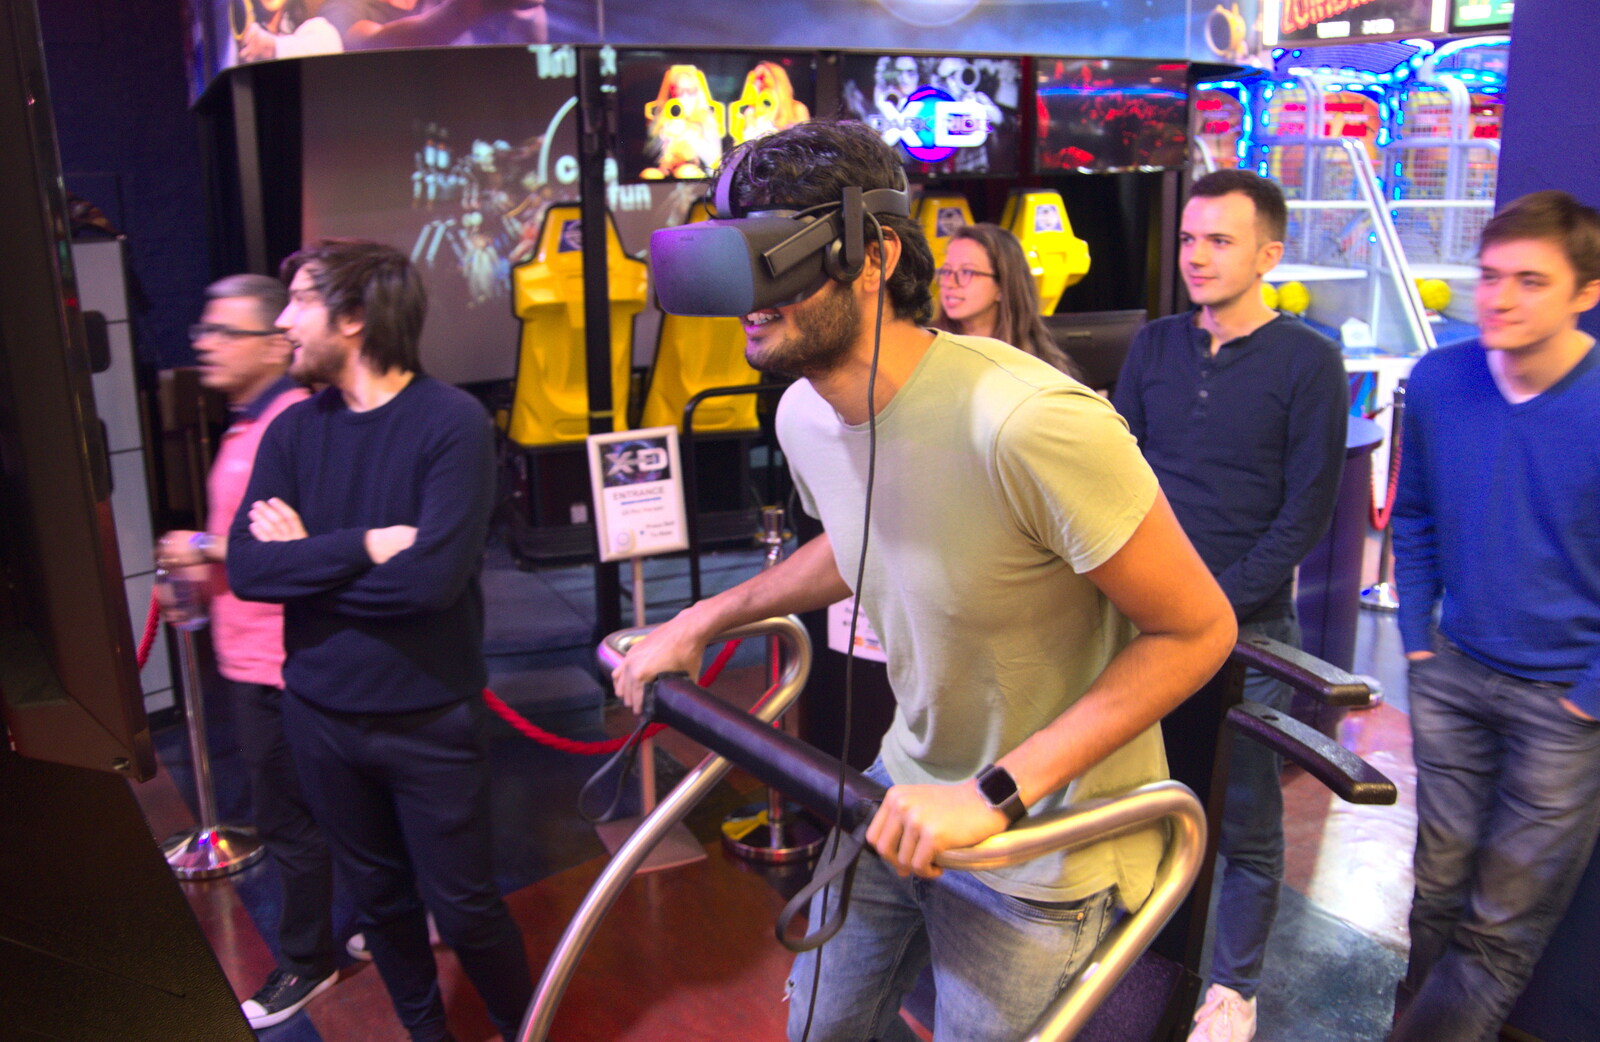 Praveen does some VR from A Team Outing at Namco Funscape, South Bank, London - 27th March 2019